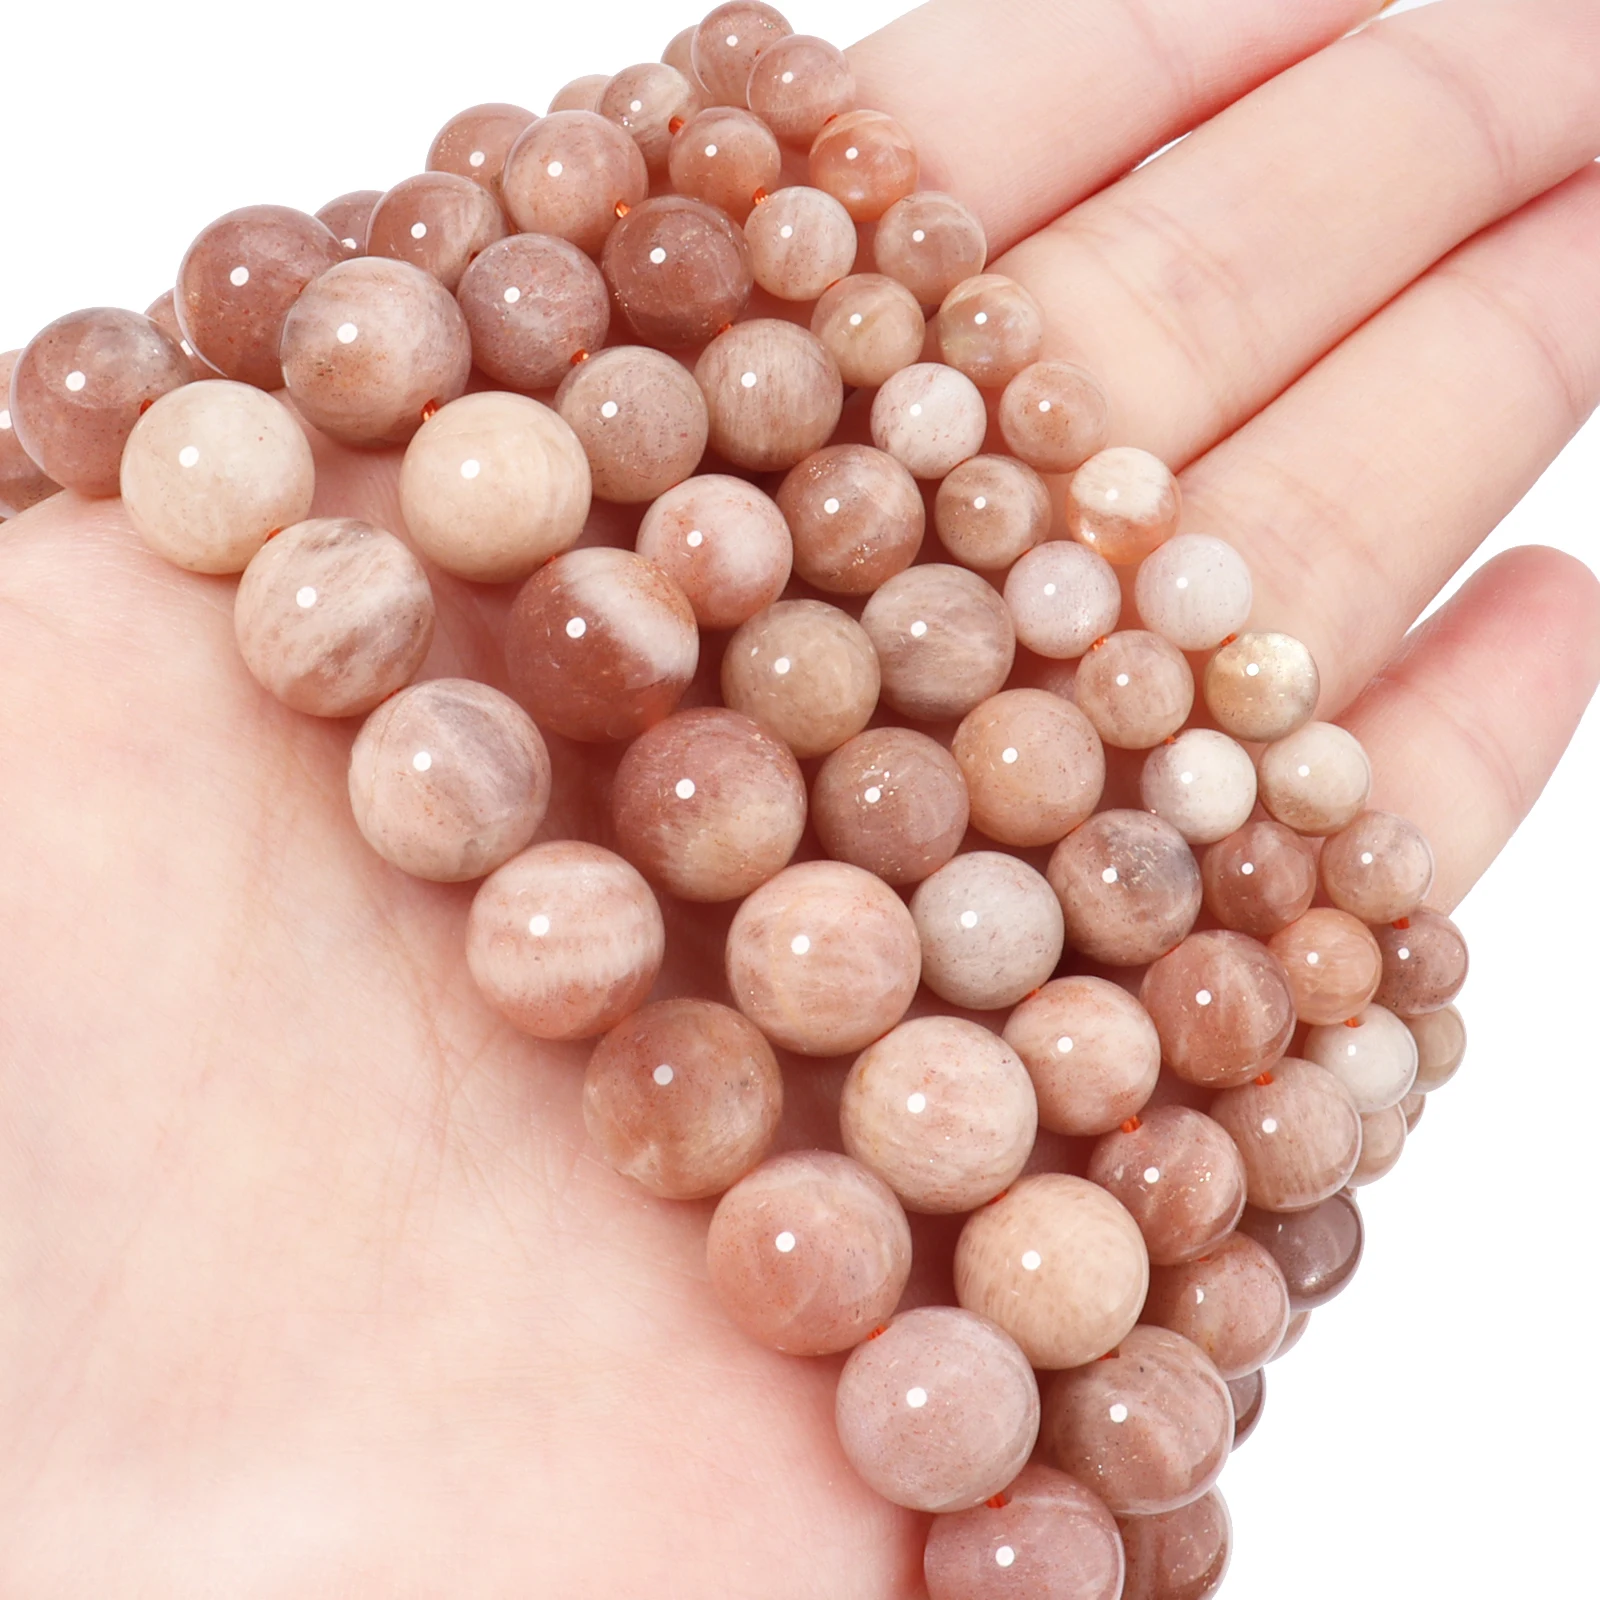 Natural Sunstone Round Gemstone Loose Spacer Beads For Jewelry Making DIY Handmade Bracelet Necklace Accessories 4/6/8/10/12MM